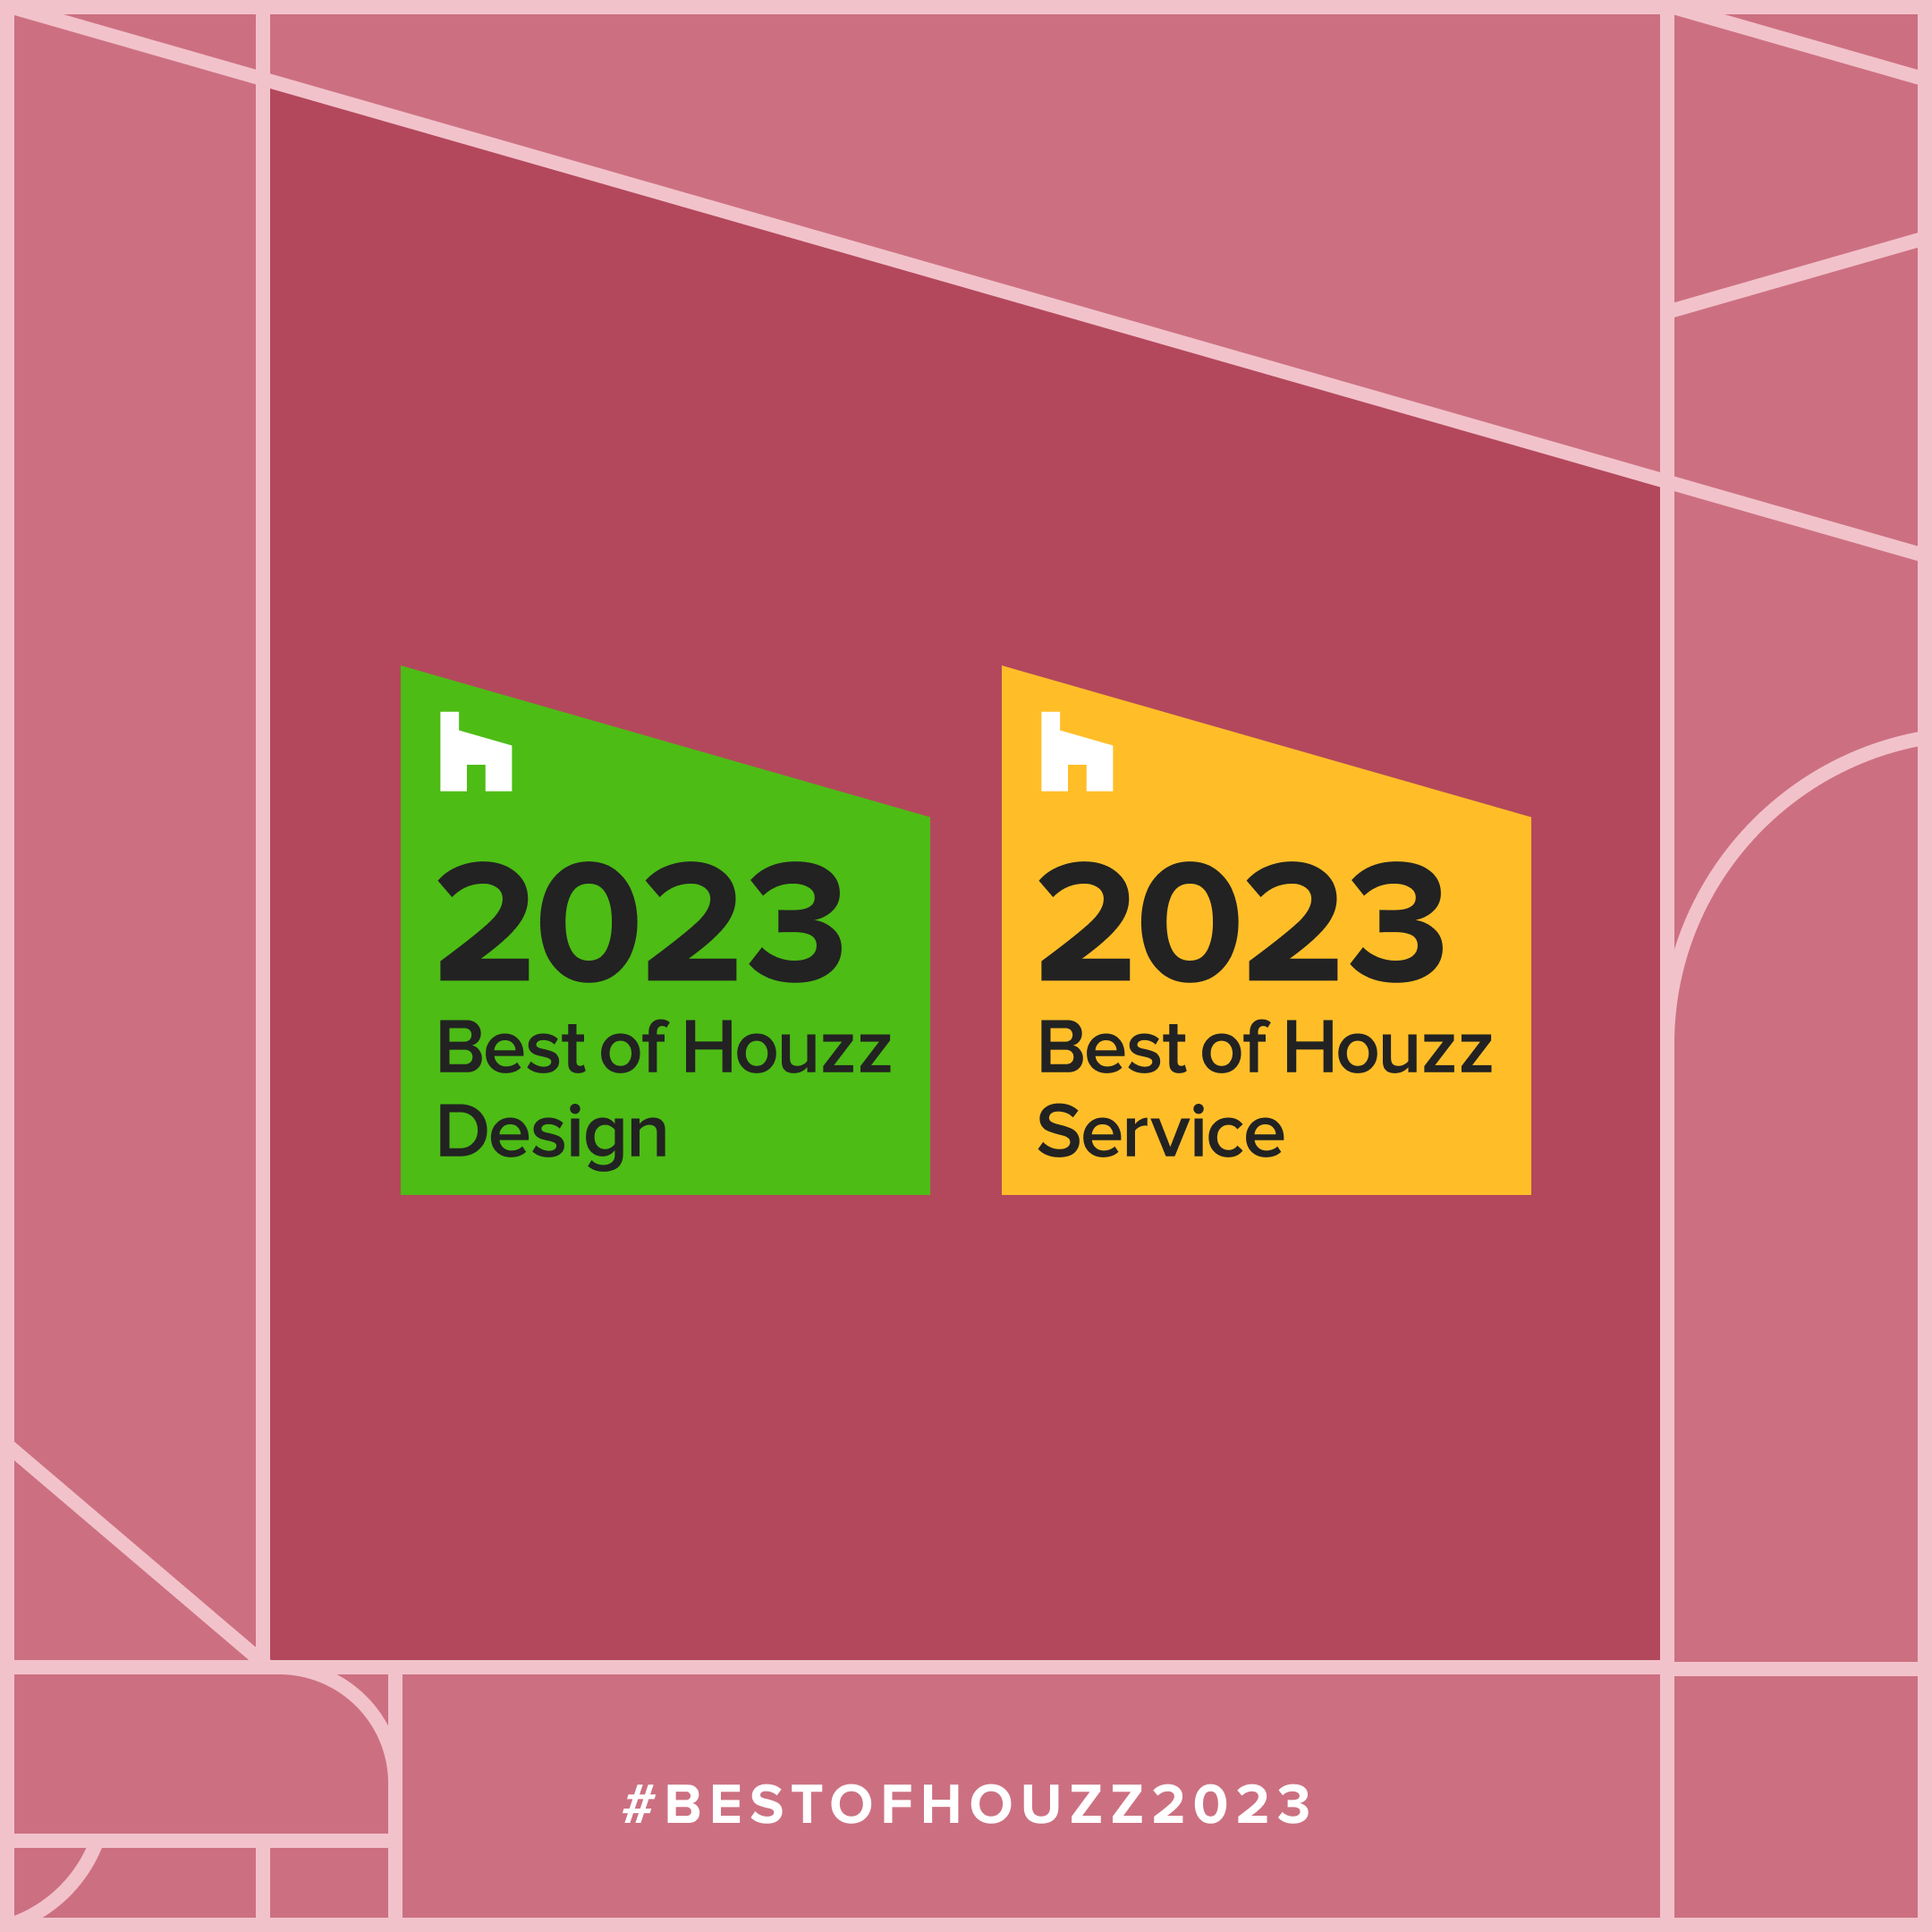 Cassy Young, owner of Young Design Group received both Best of Houzz Design and Best of Houzz Service for 2023.